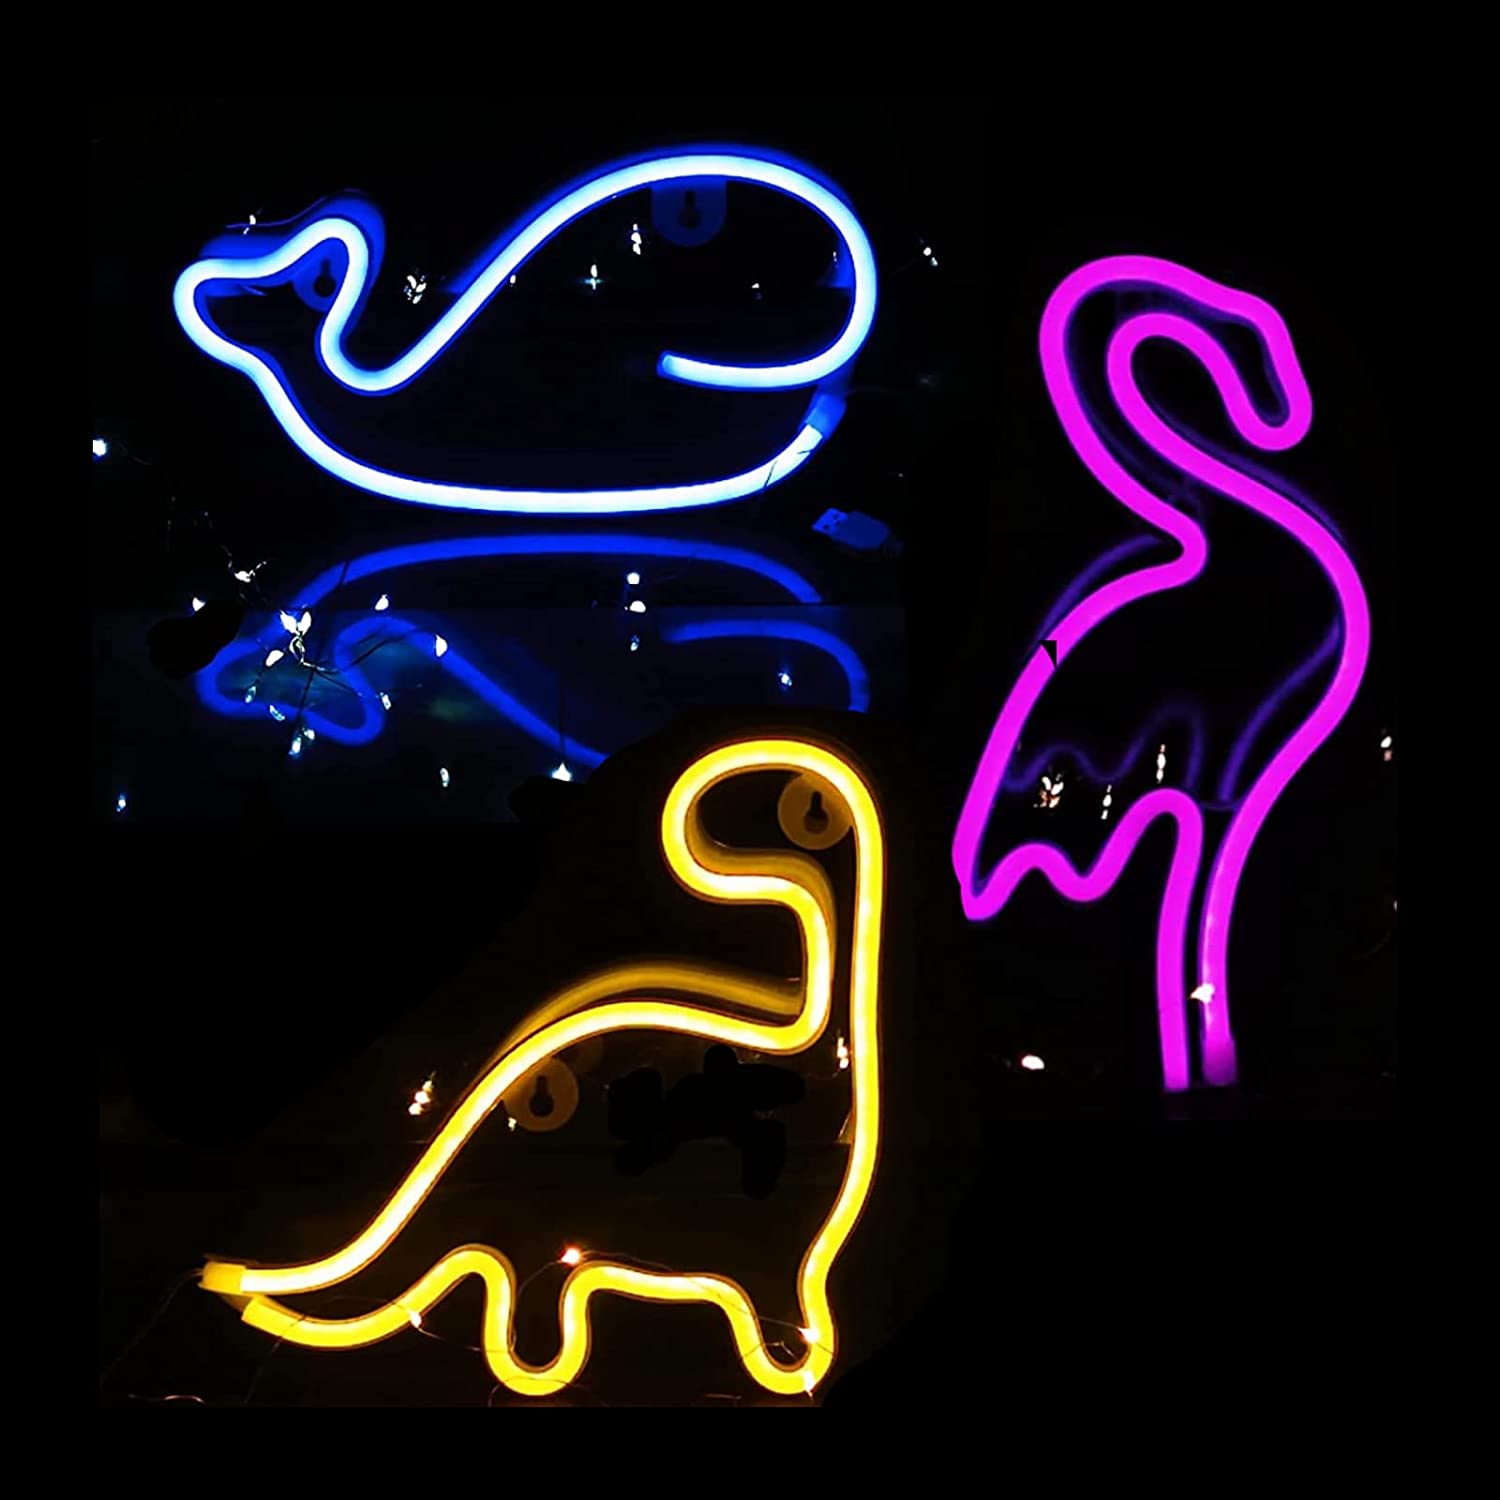 Buy Viopvery 3 Pcs Neon Signs, LED Neon Light Signs for Wall Decoration, LED Dinosaur Bird Whale Neon Lights for Bedroom, Party, Birthday, Christmas, Wedding, Bar Online in Indonesia. B09BC6MG2J